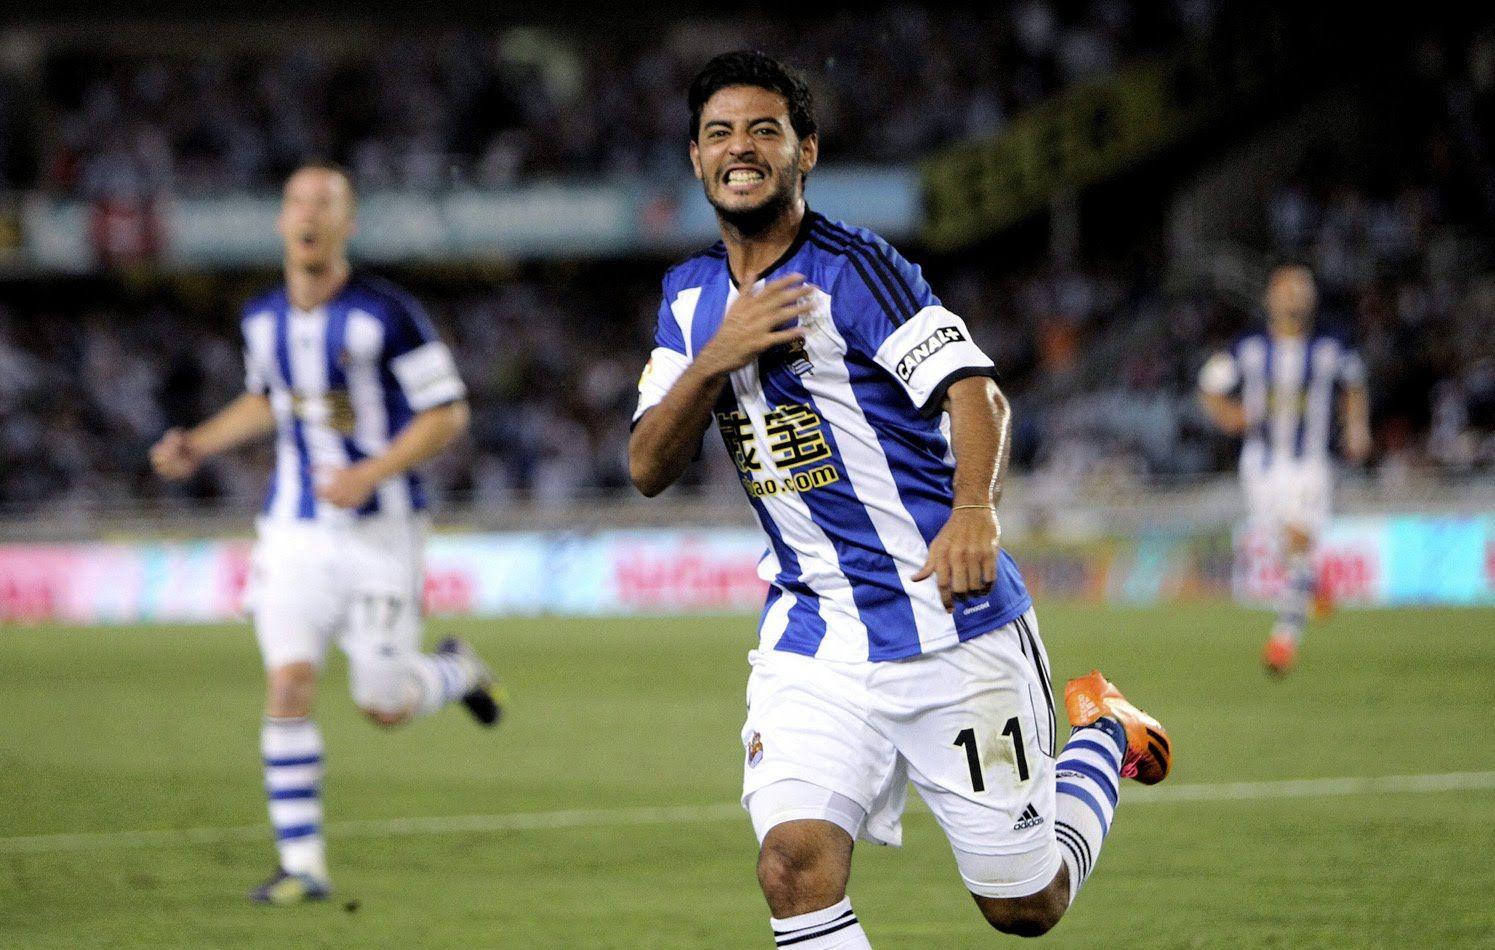 Real Sociedad's Carlos Vela to Sign With LAFC as First DP